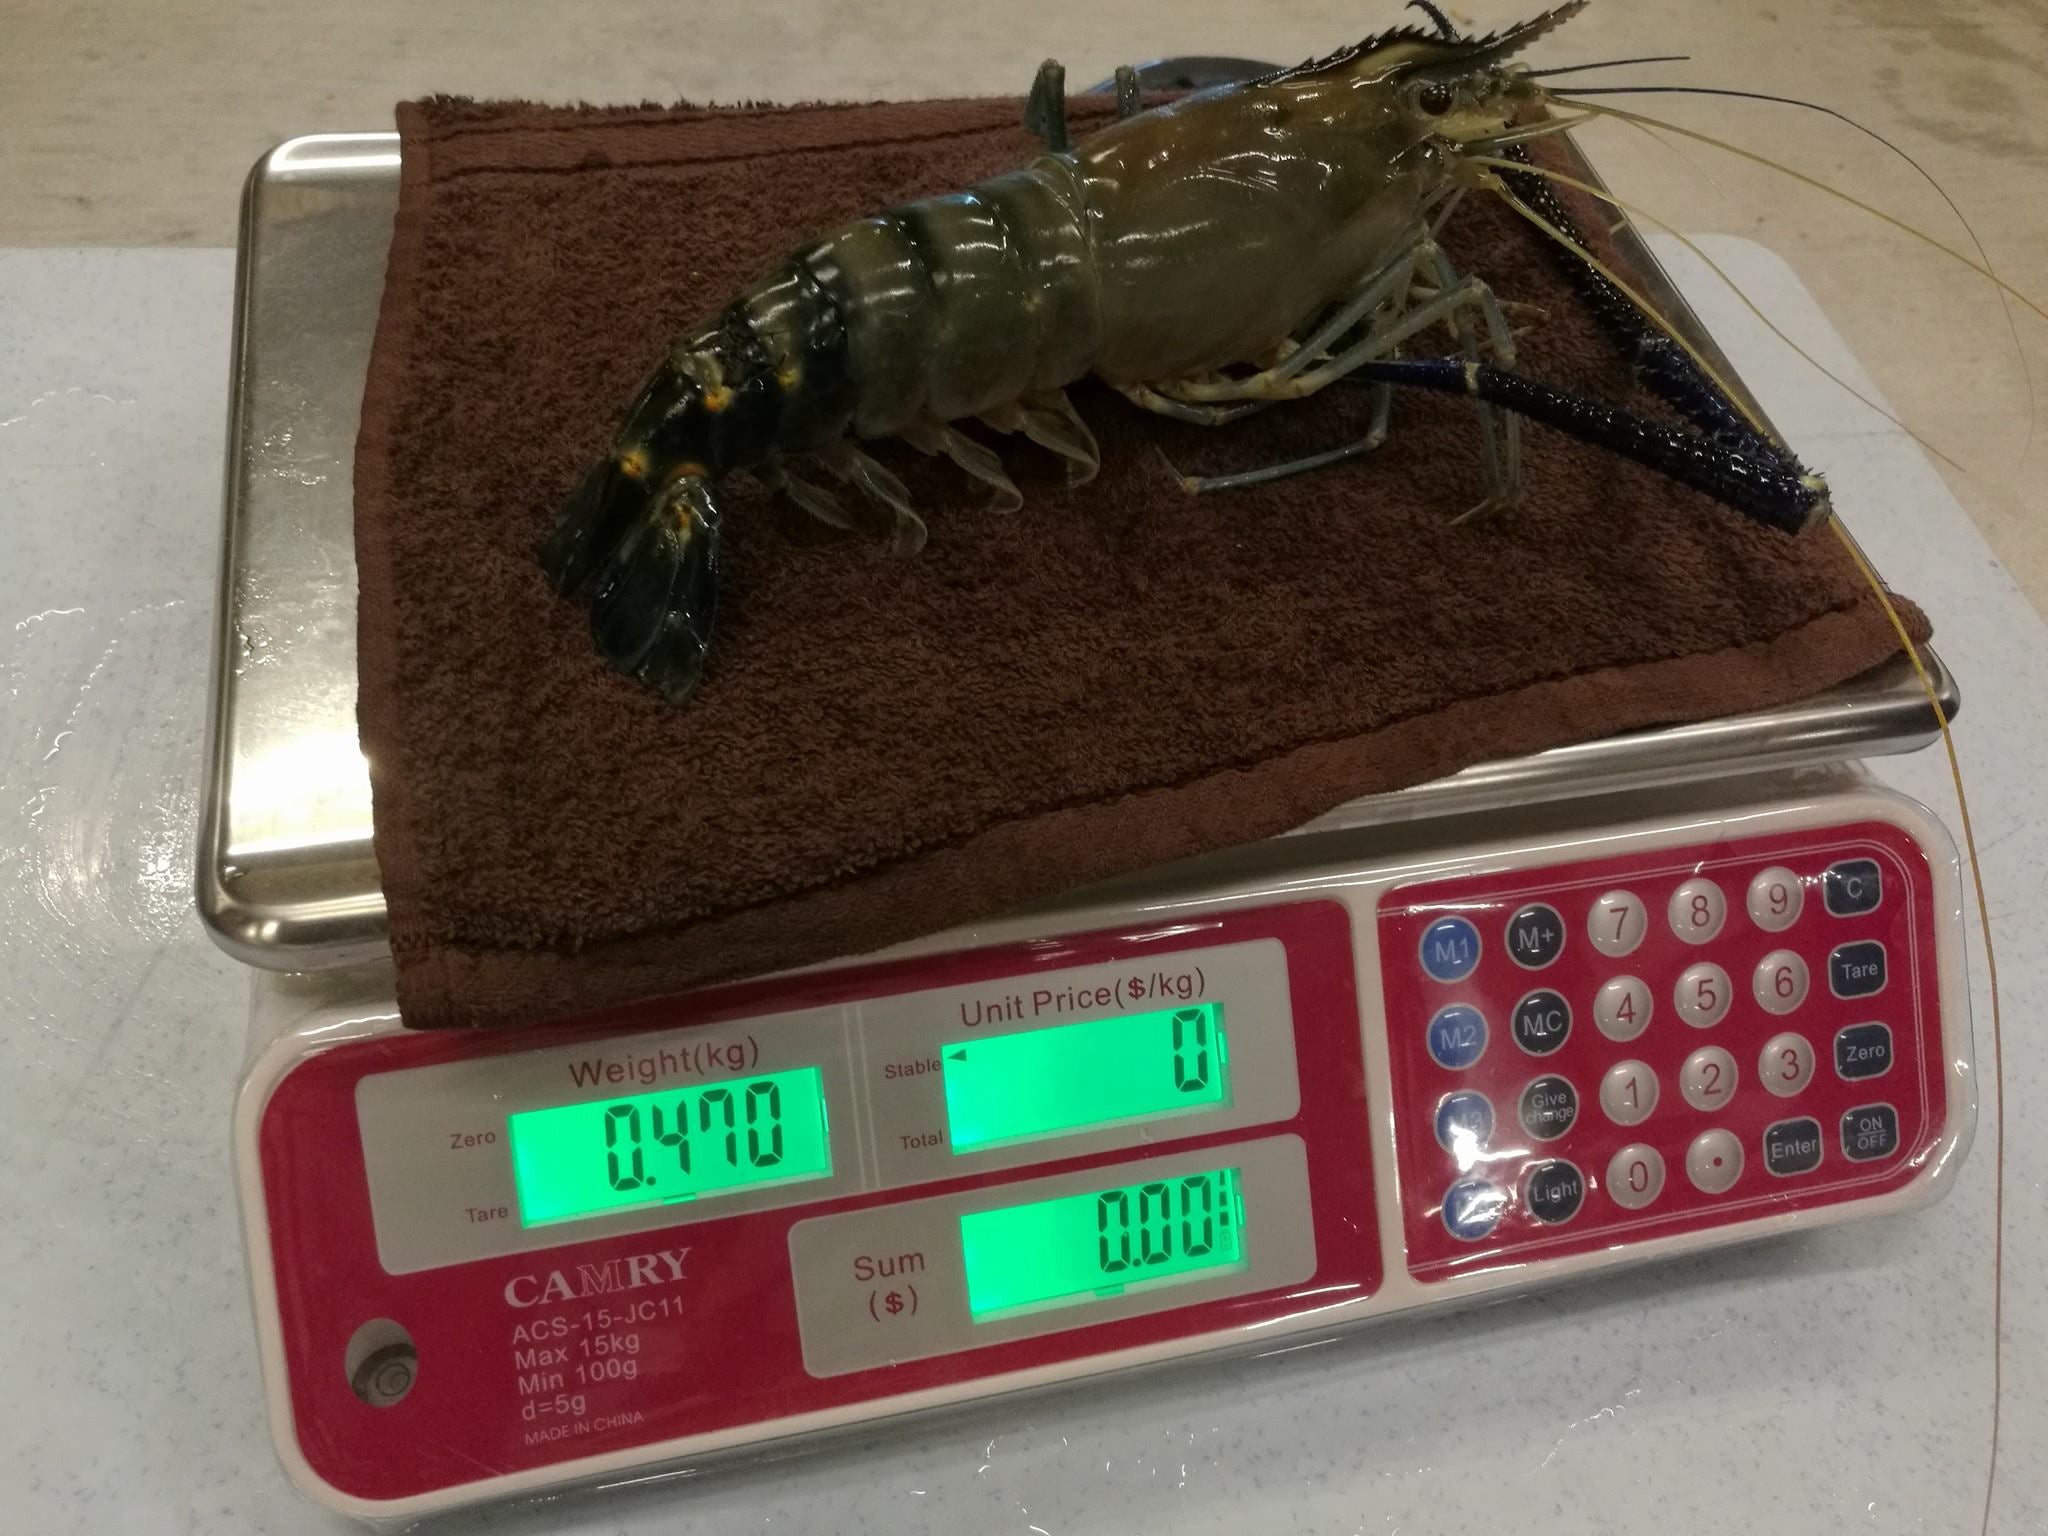 You Can Now Fish For Your Own Prawns And Crabs To Grill Here! - WORLD OF BUZZ 1